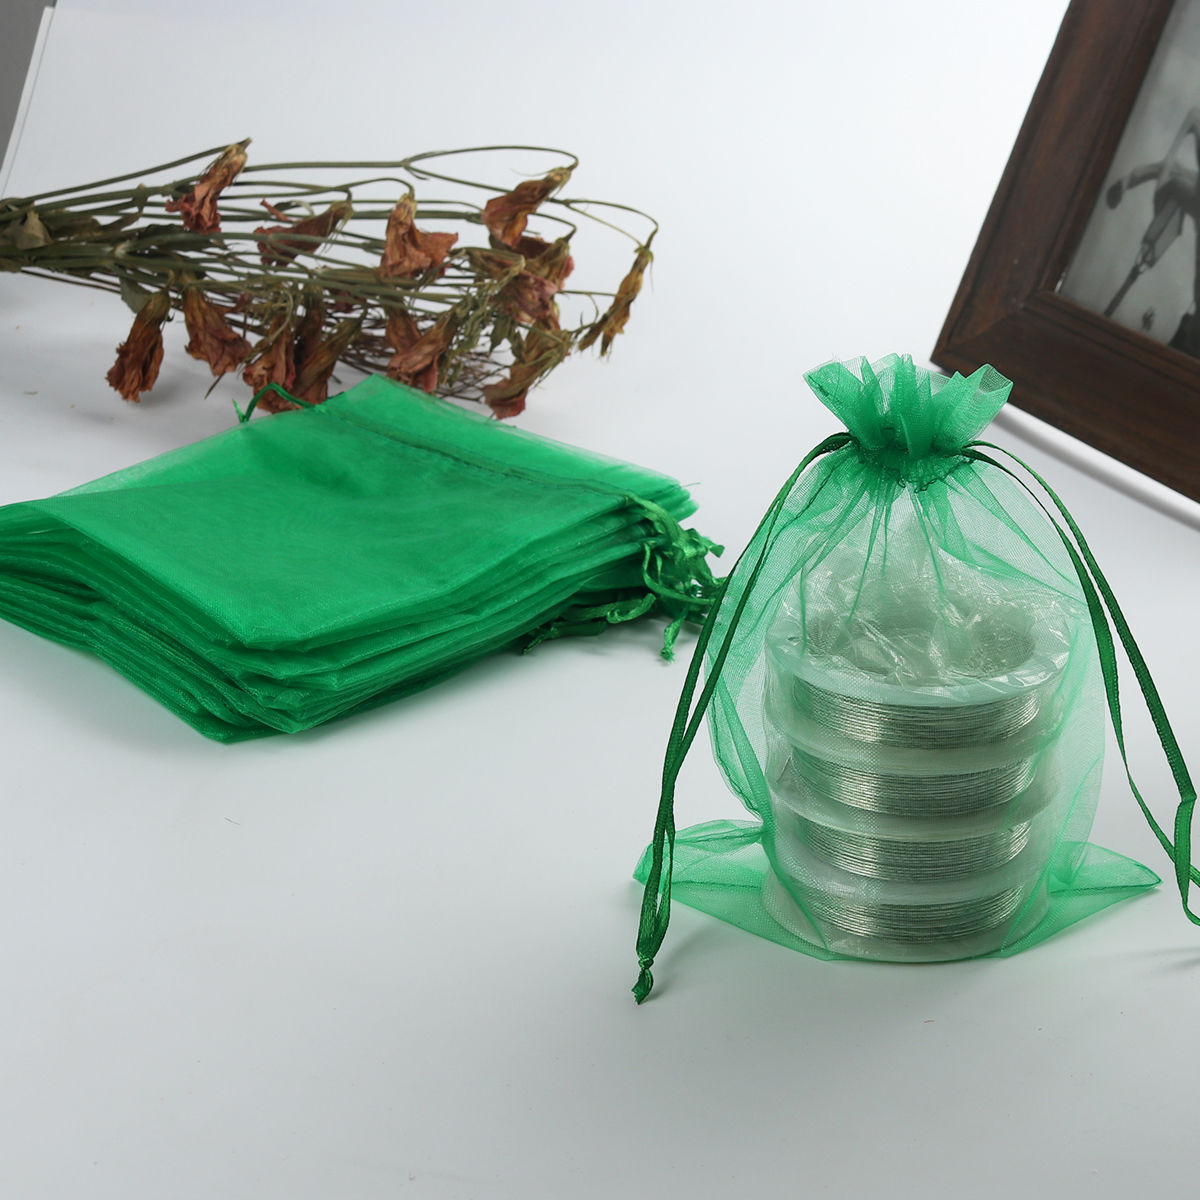 Picture of Wedding Gift Organza Jewelry Bags Drawstring Rectangle Dark Green (Usable Space: 15.5x12.5cm) 18cm x 12.8cm, 20 PCs